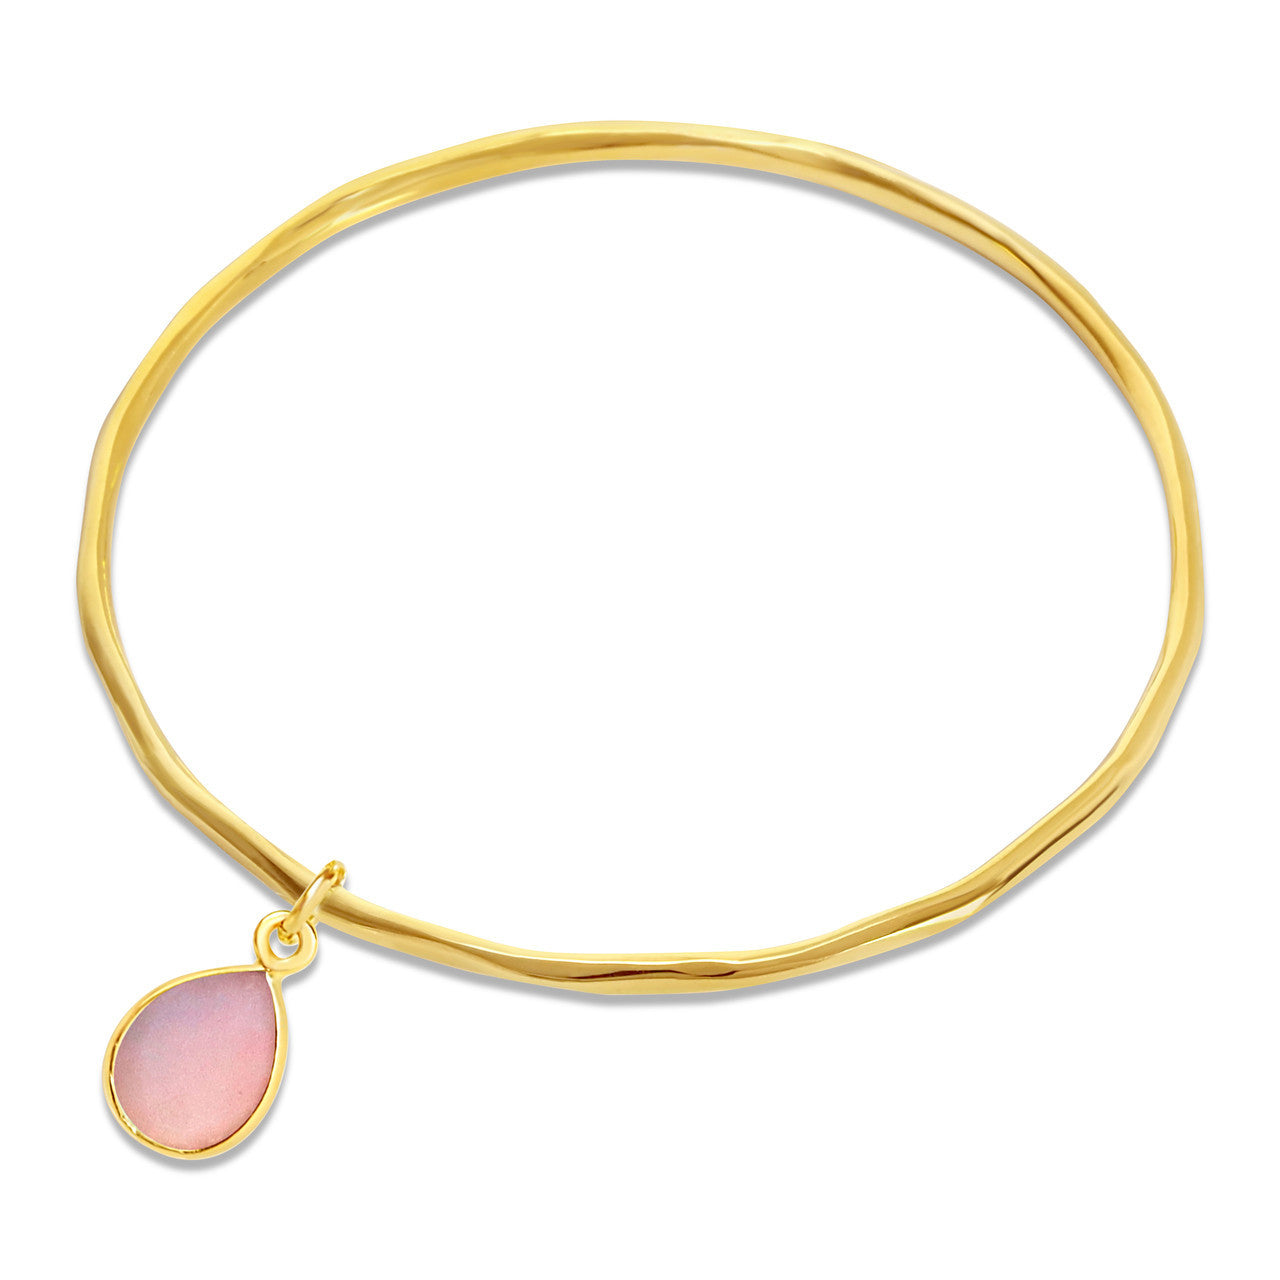 pink opal charm bangle in gold on a white background